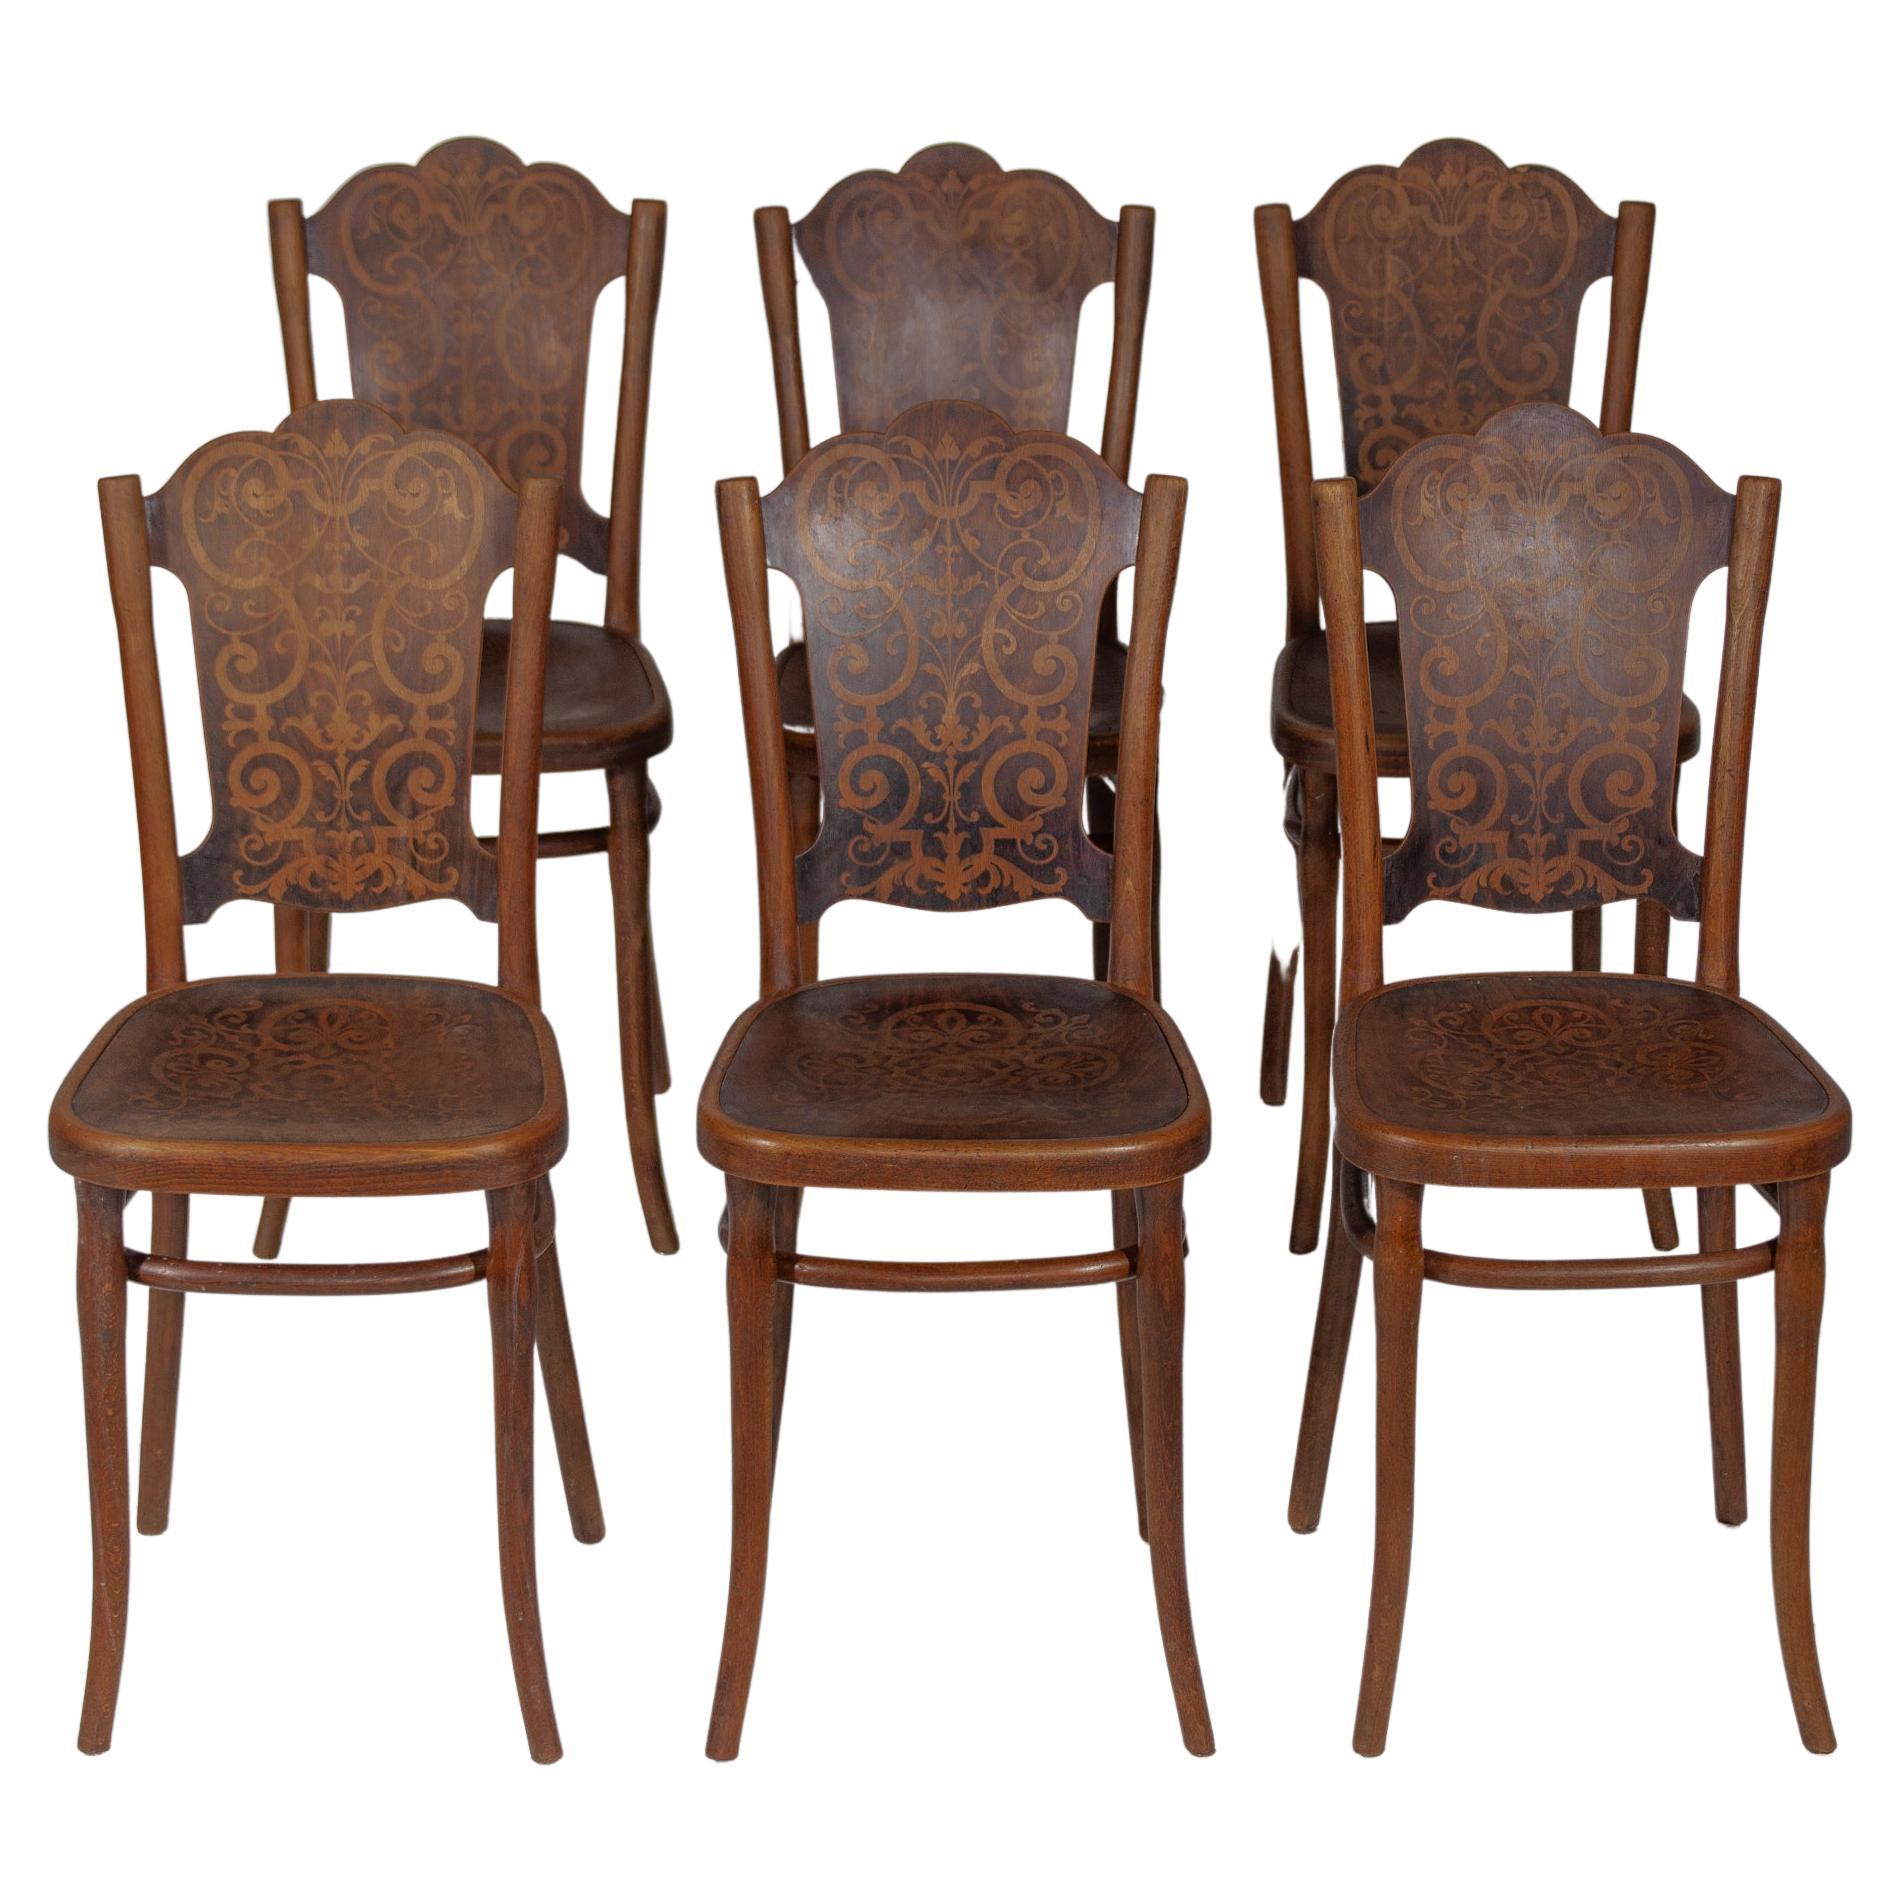 Antique very beautiful Art Nouveau set of six Thonet chairs with a printed pattern all chairs are labeled with the original THONET paper logo. Thonet design of each chair with patina and character brown accents, cafe or bistro chairs steamed curved